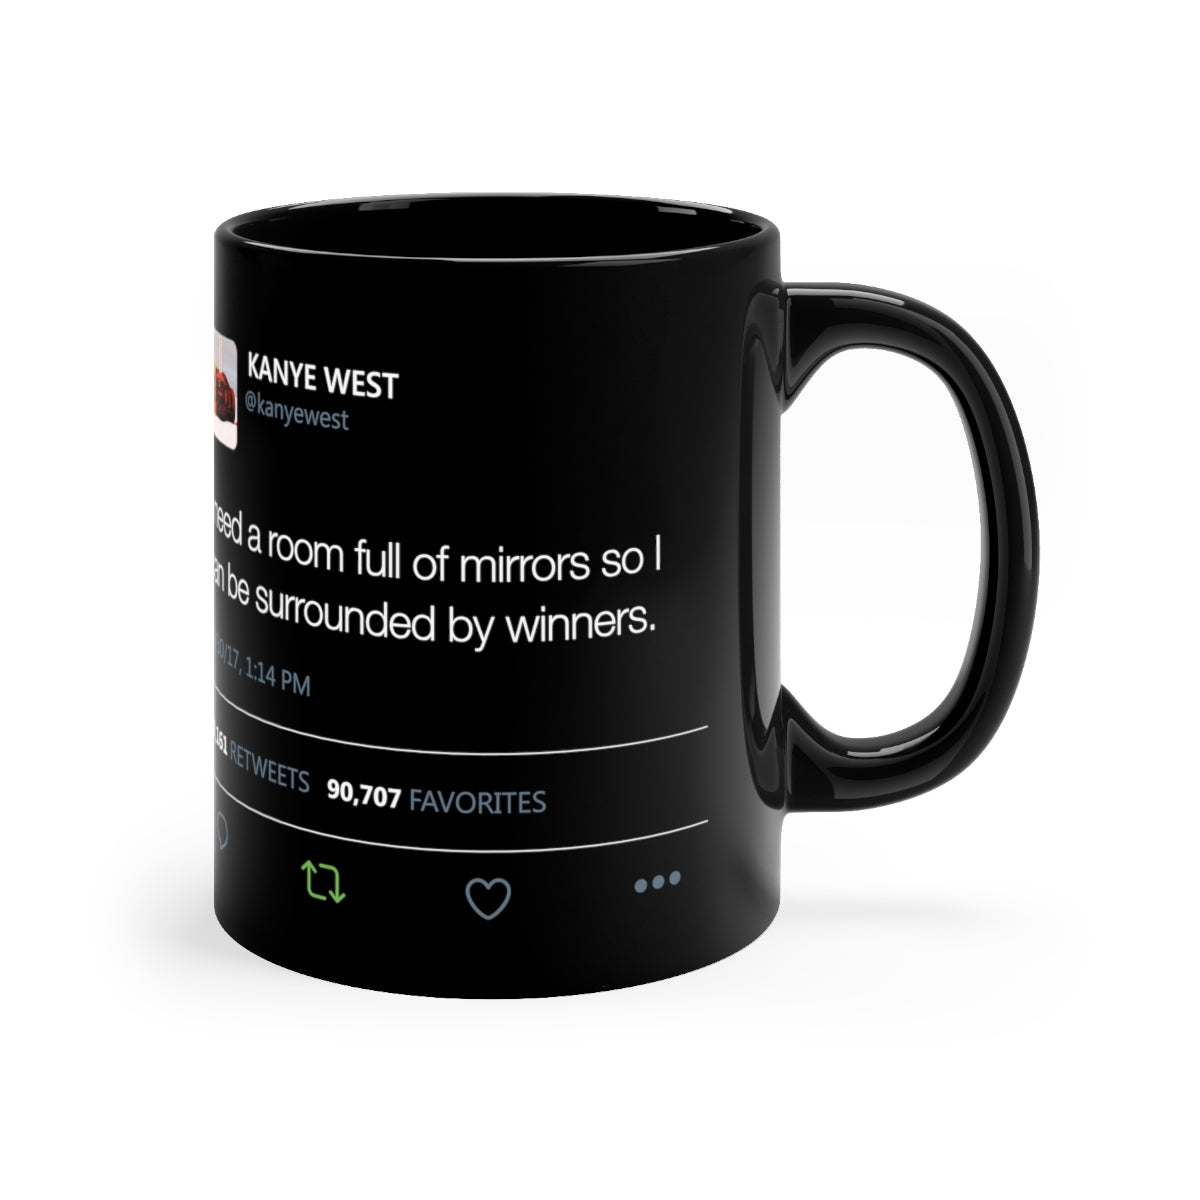 I need a room full of mirrors so I can be surrounded by winners - Kanye West black Mug Tweet Inspired-11oz-Archethype